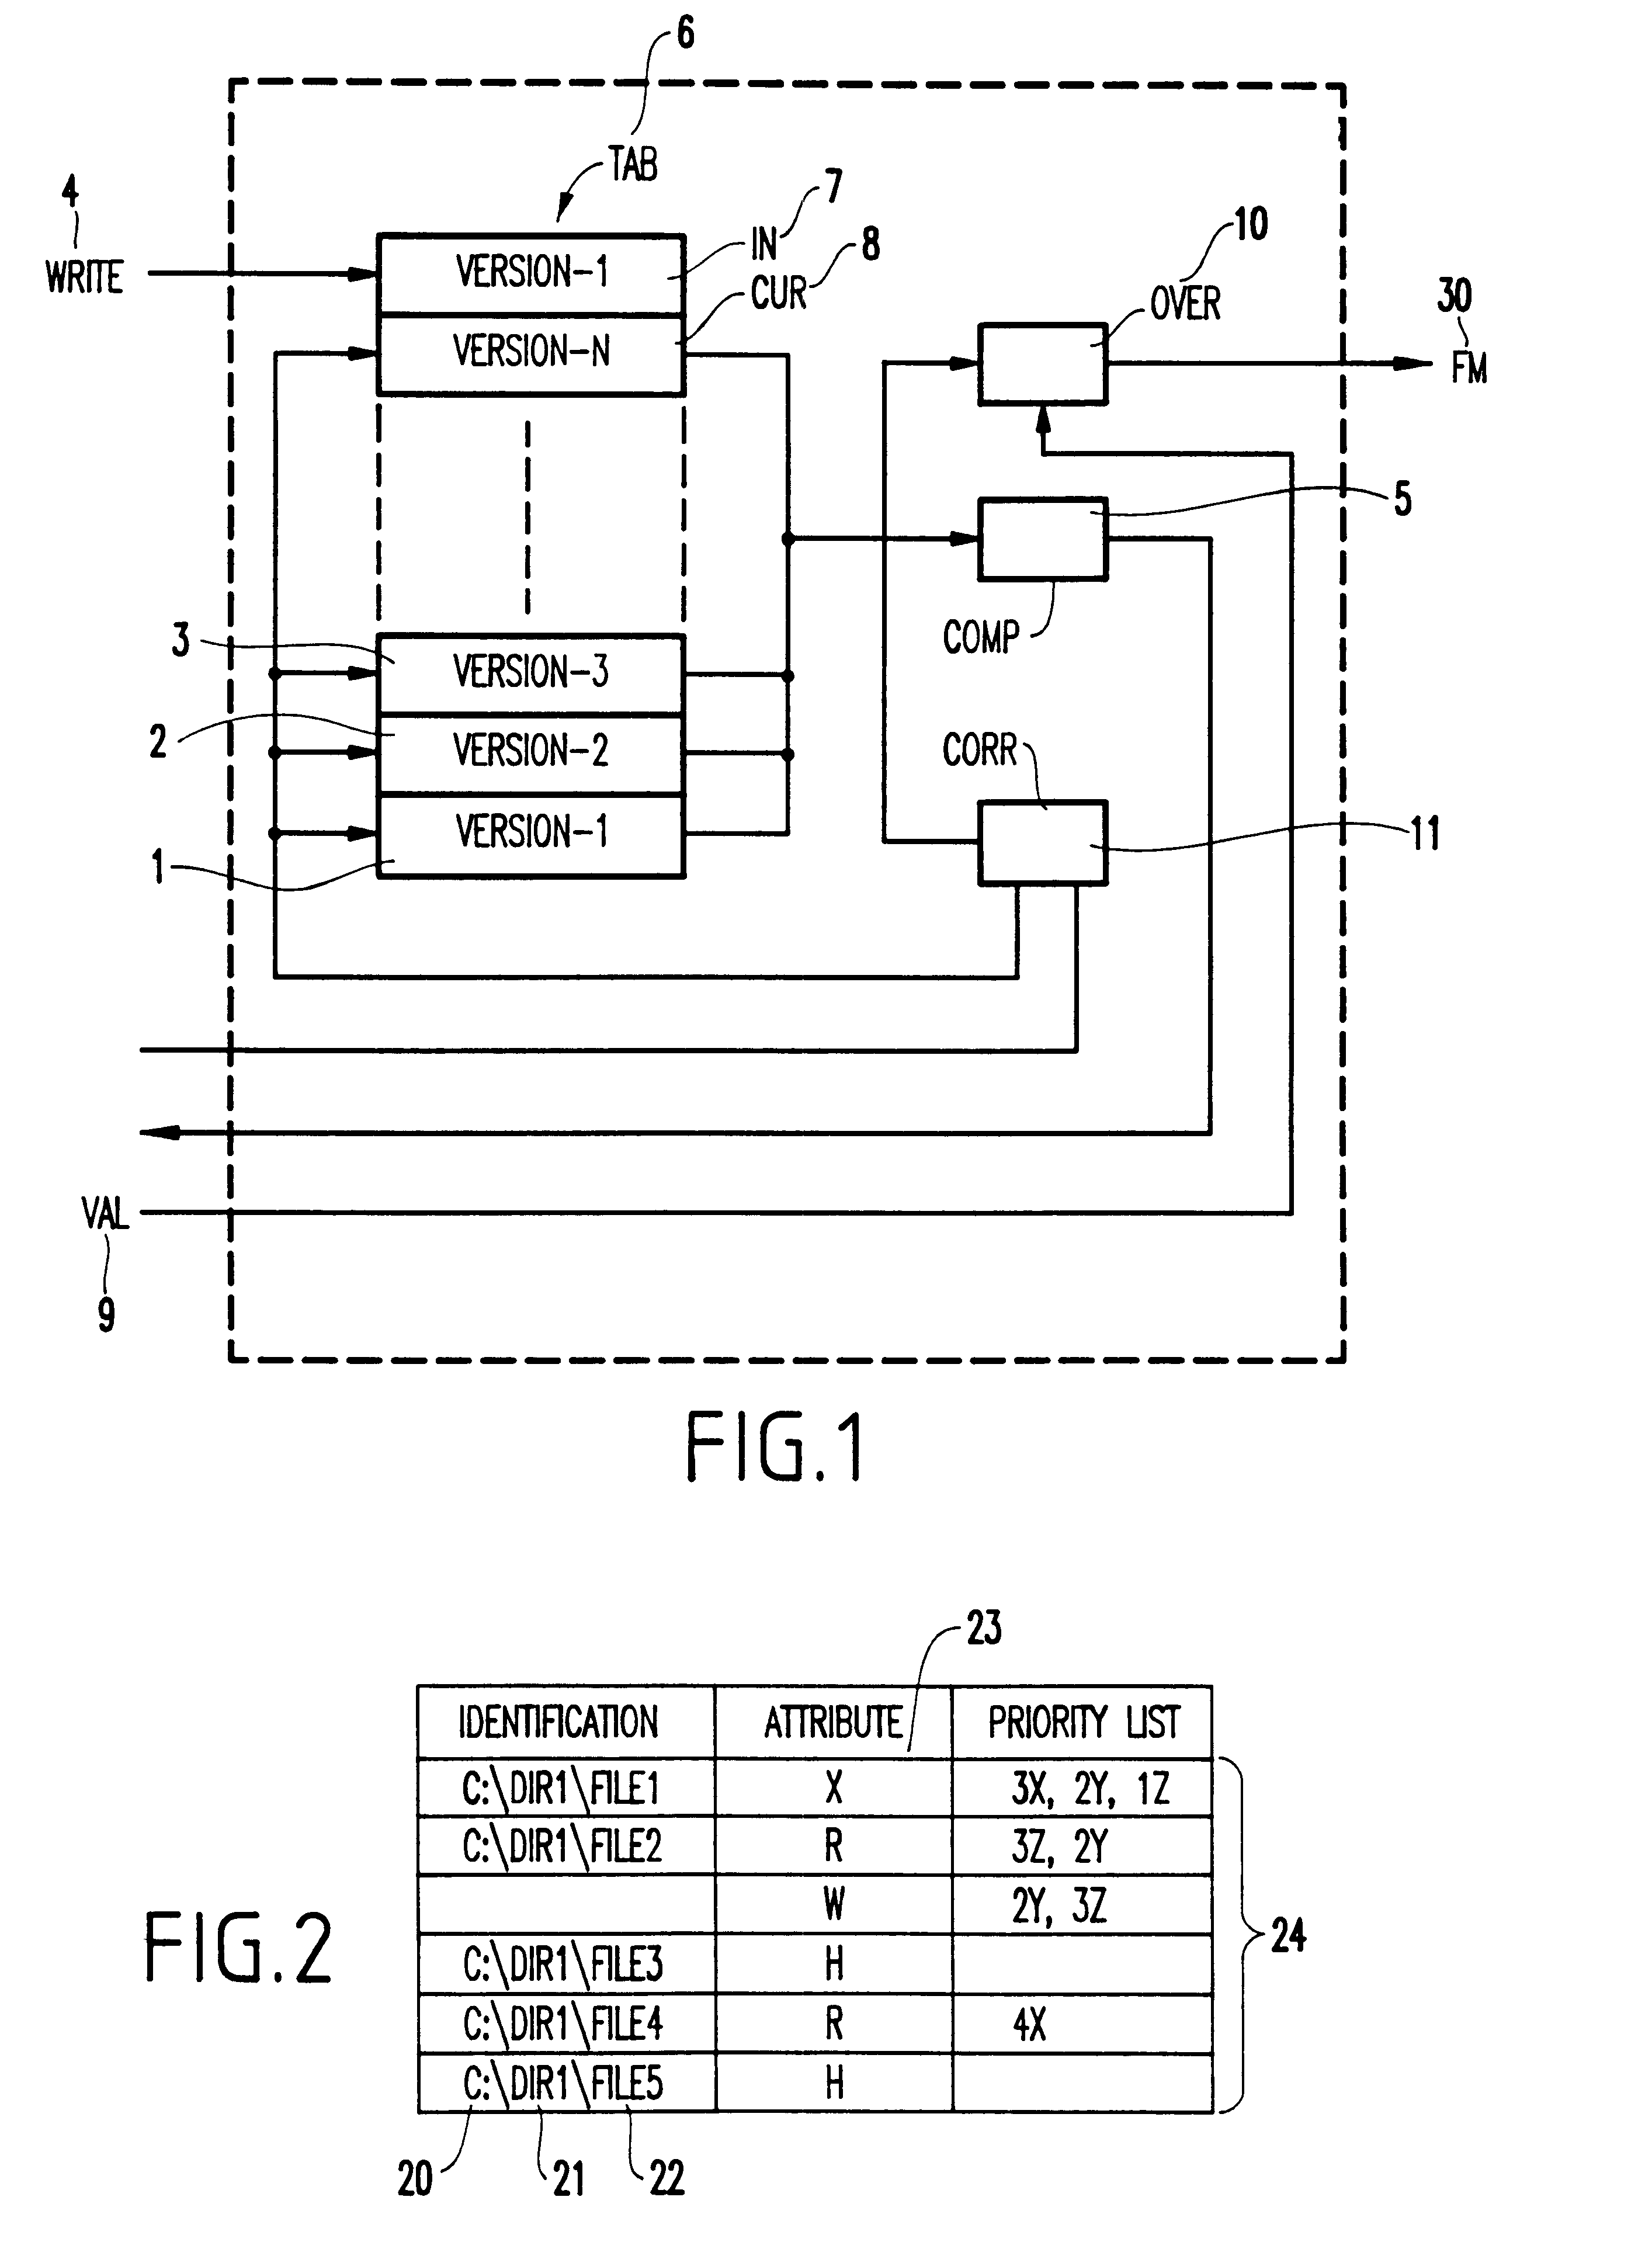 Apparatus for keeping several versions of a file